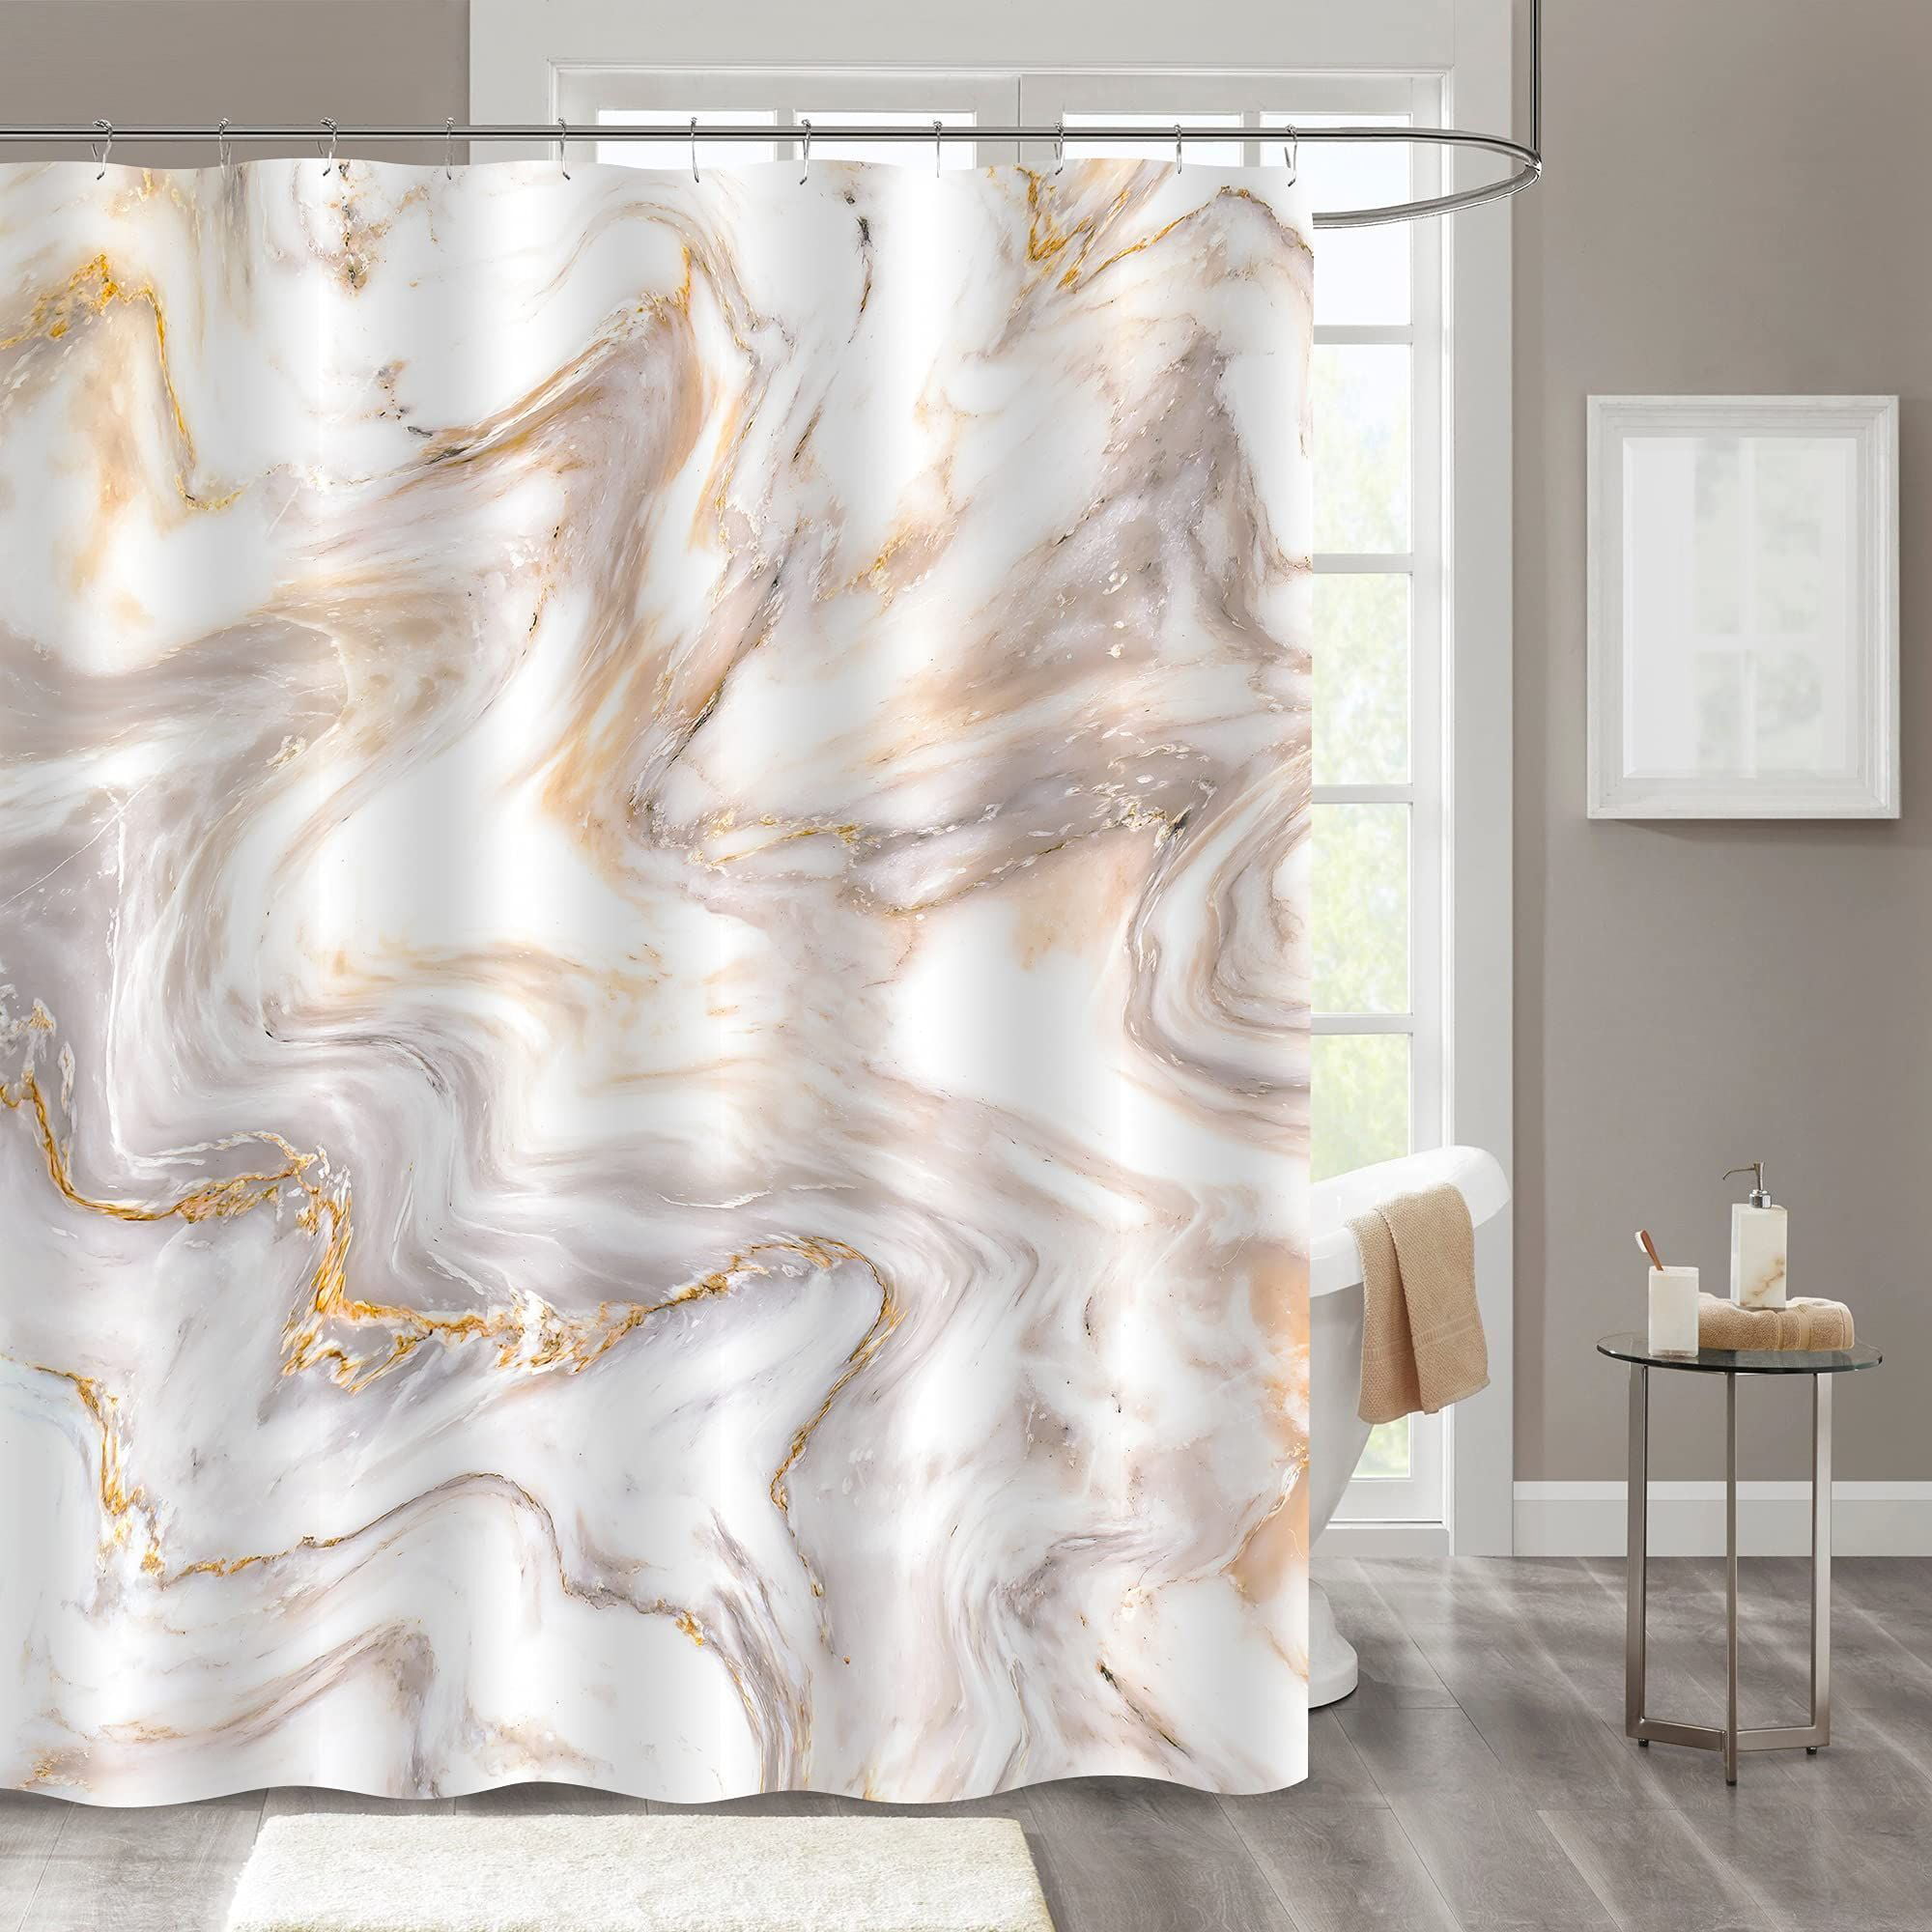 Marble Golden Geometric Lines 72X72" Waterproof Fabric Shower Curtain Set Liner 